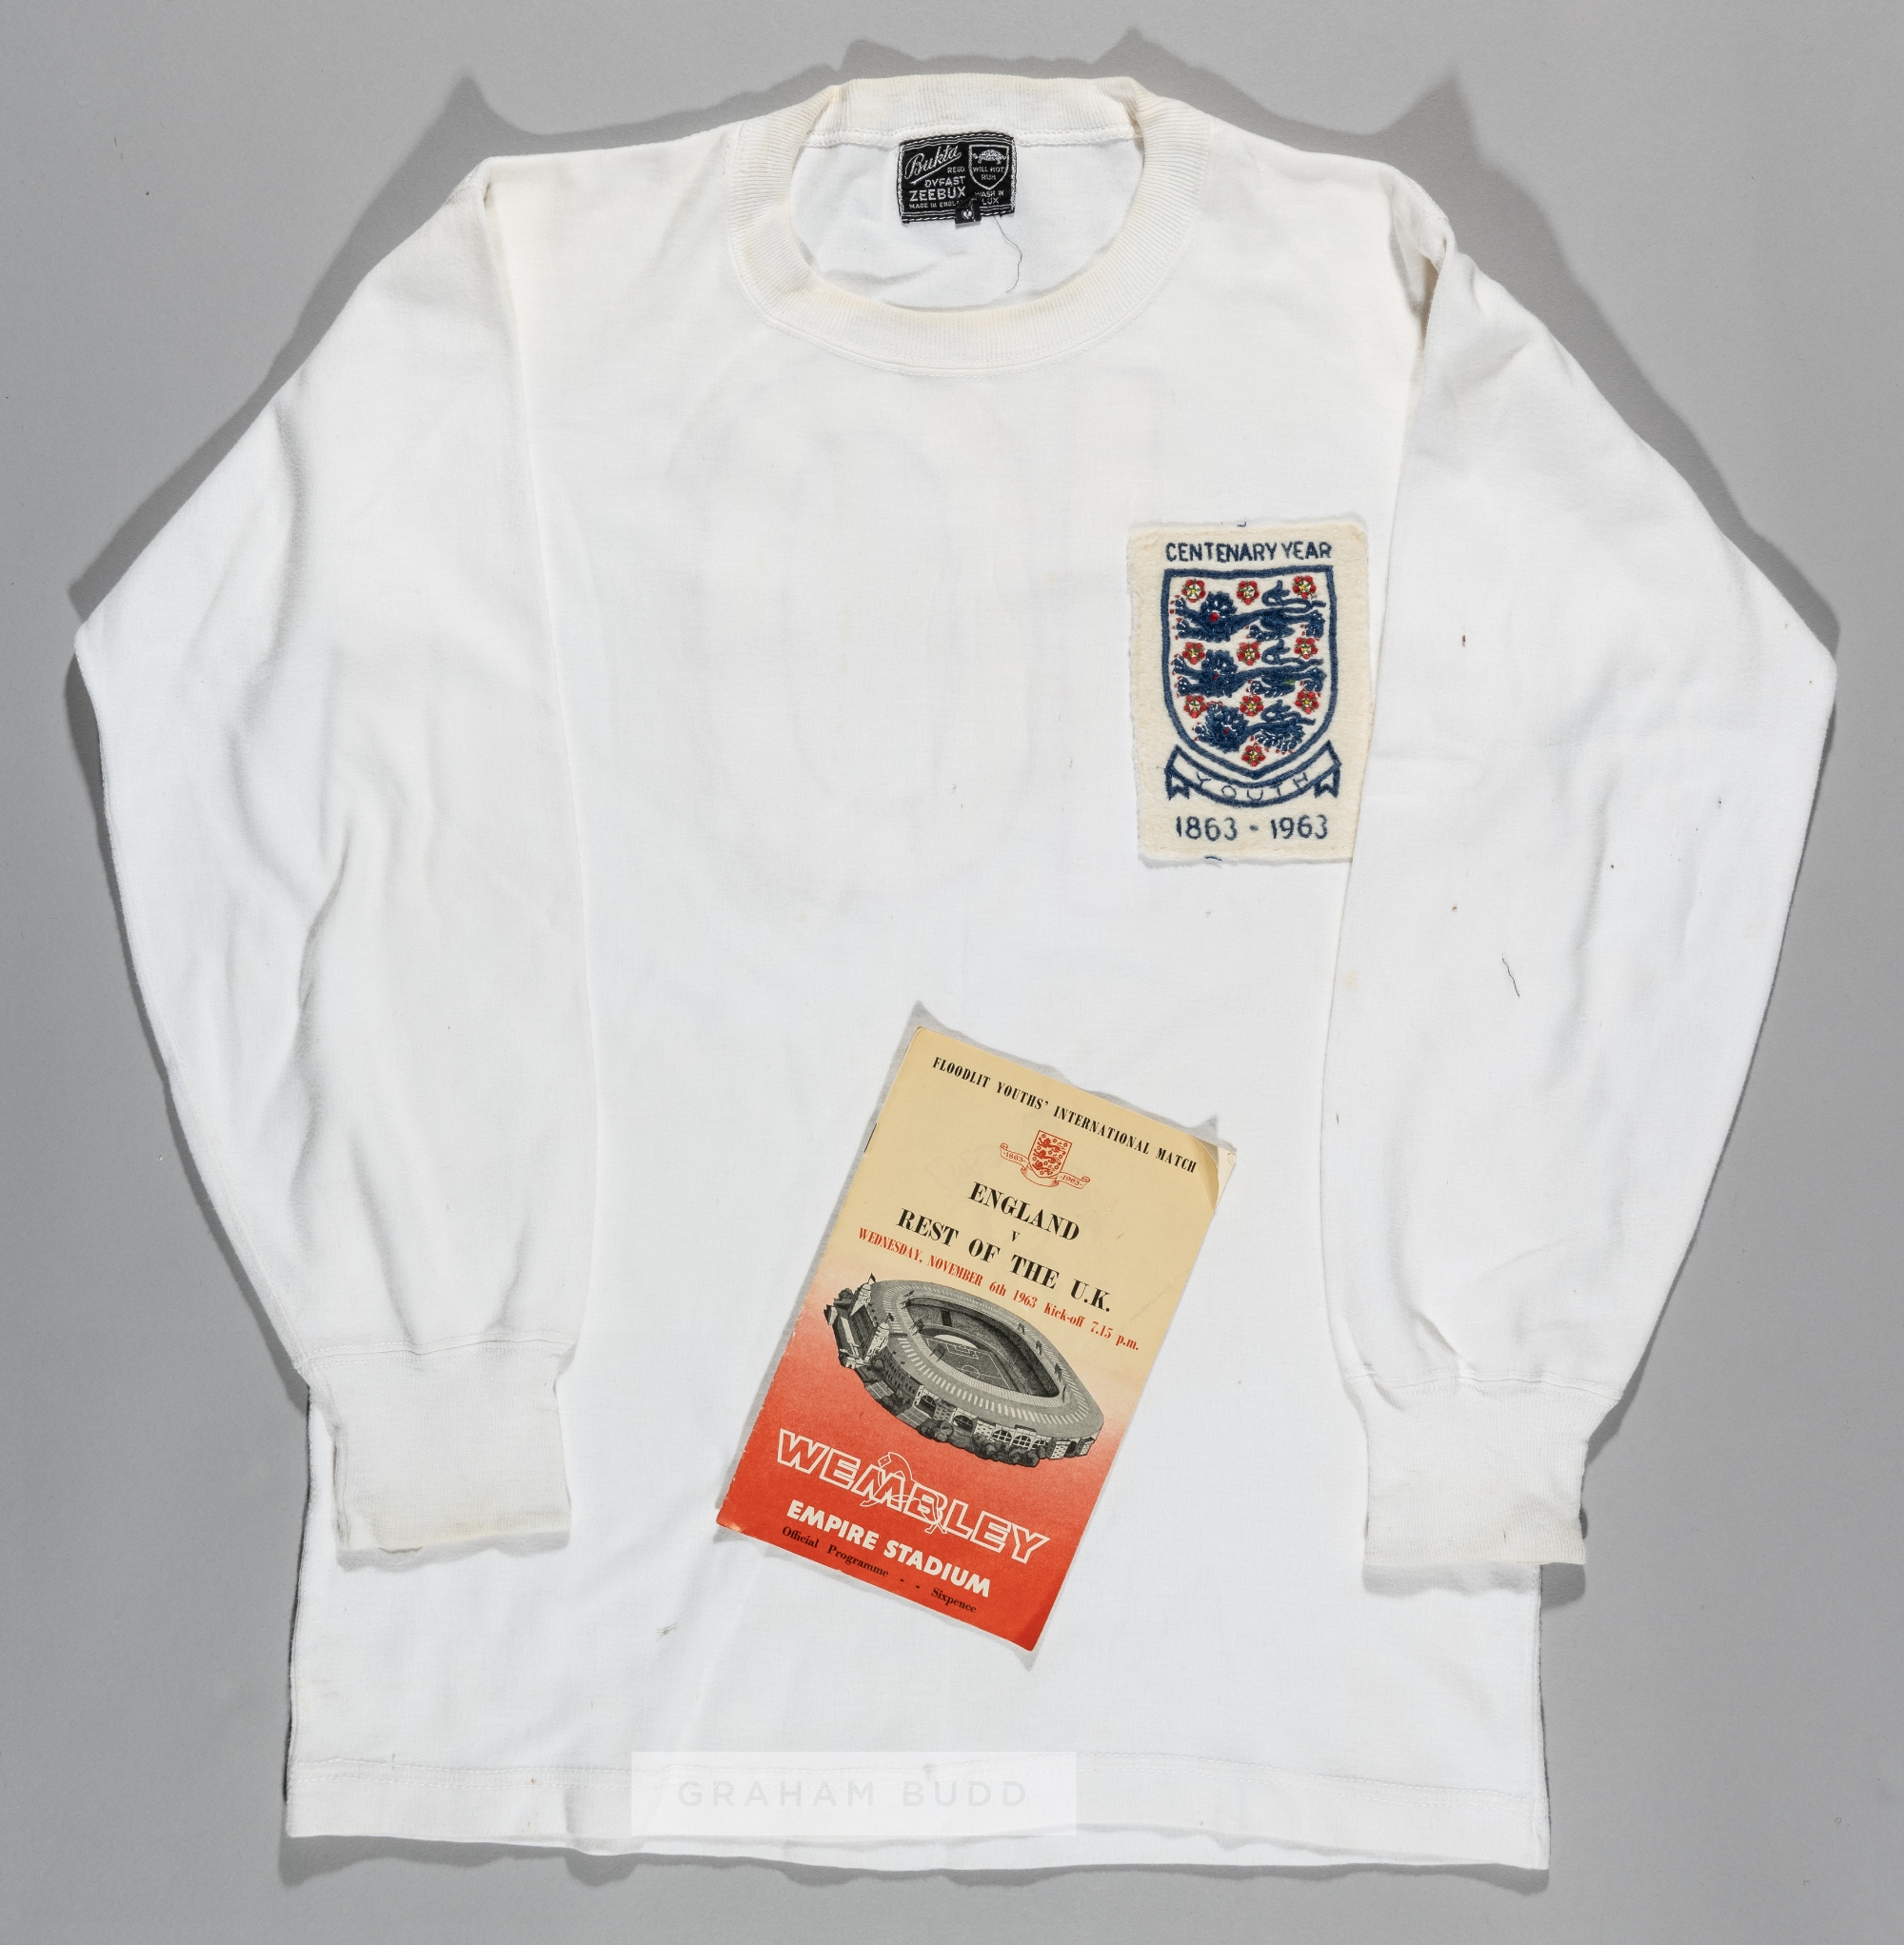 John Sissons white England Youth international No.10 jersey from the Football Association